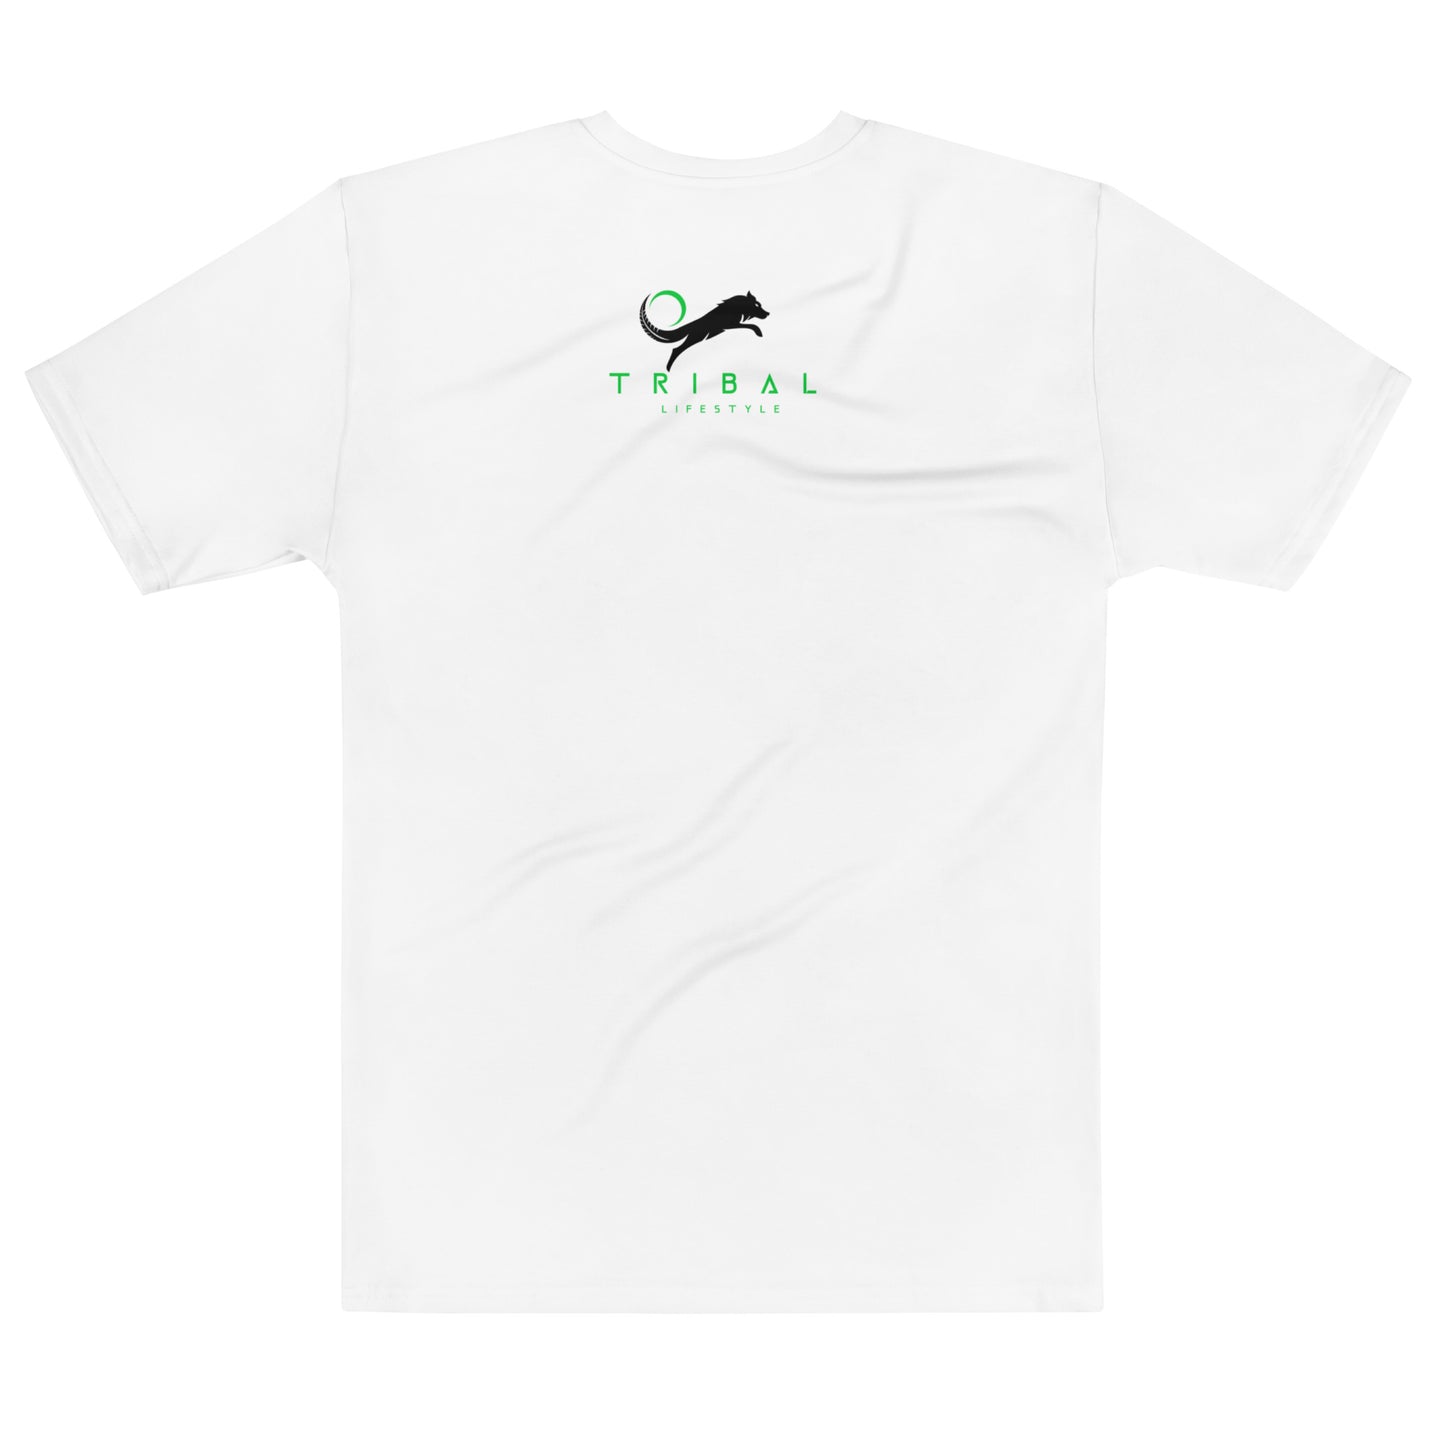 mens white athletic performance t-shirt with black wolf logo and green text on back